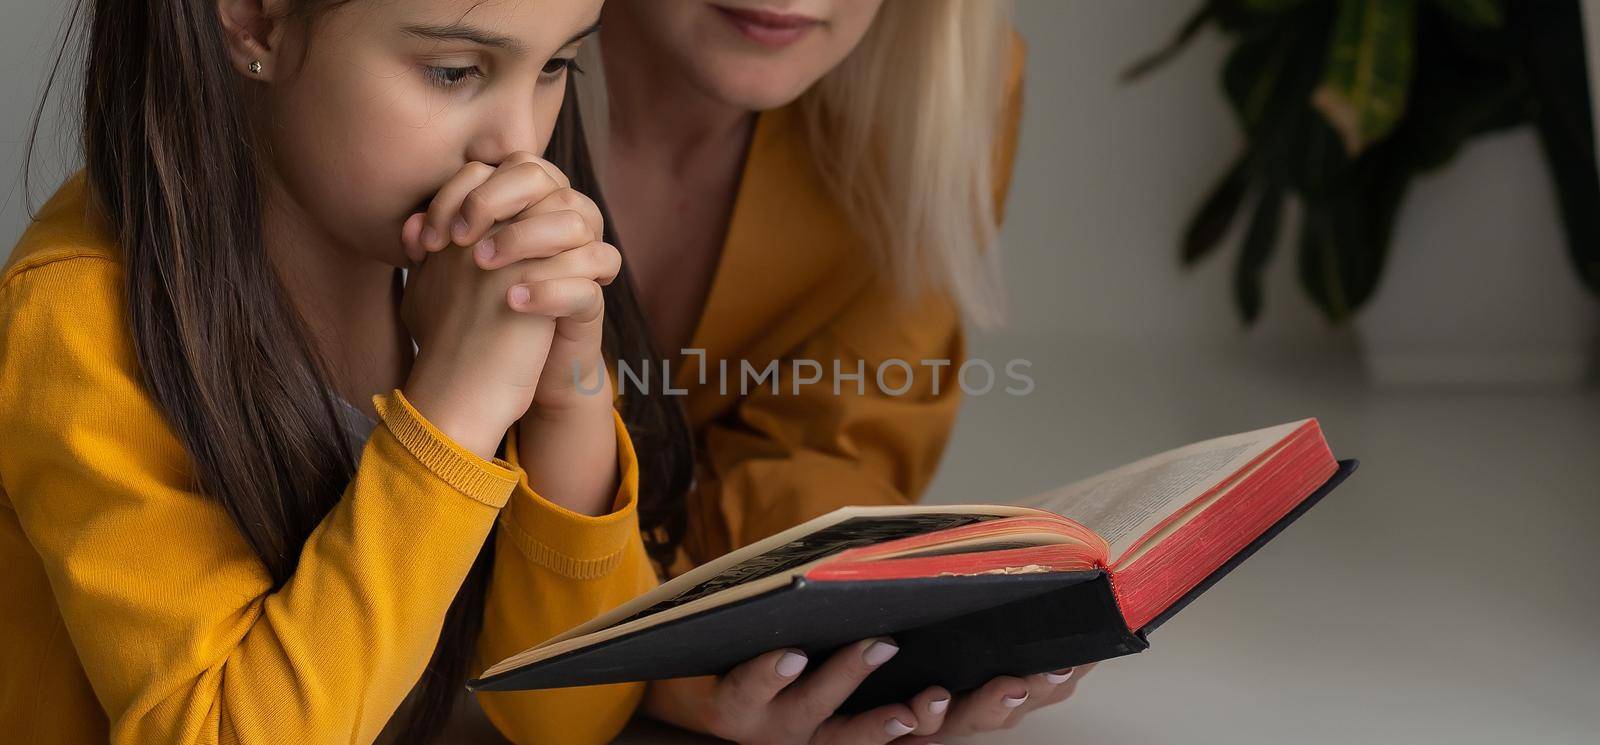 Religious Christian girl and her mother praying at home by Andelov13